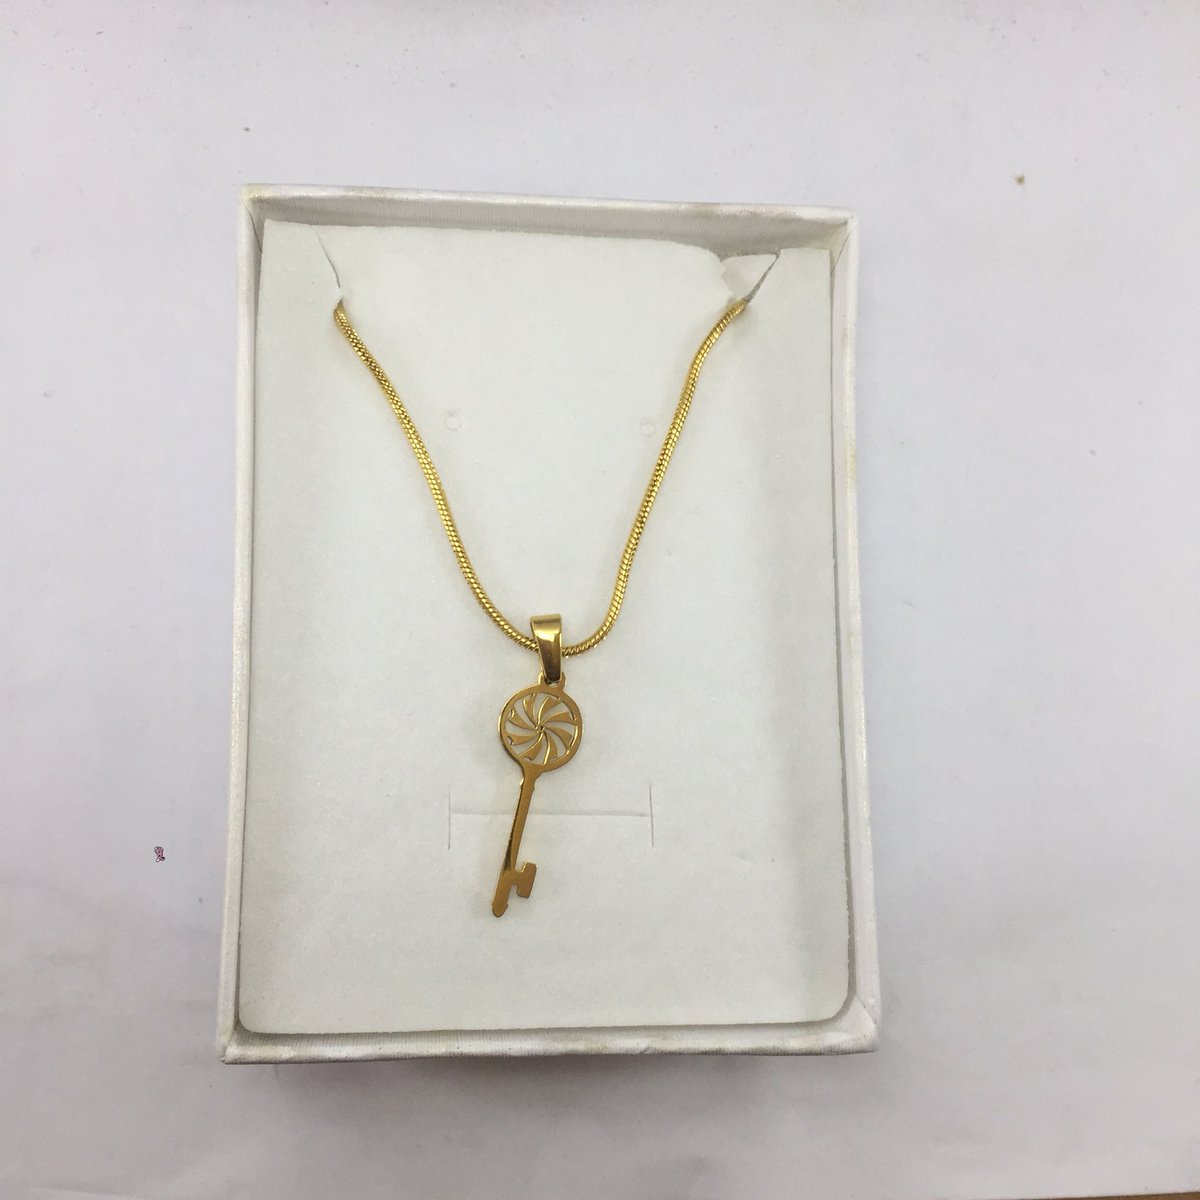 Simple Chain x Key Pendant for N2500.Please Rt